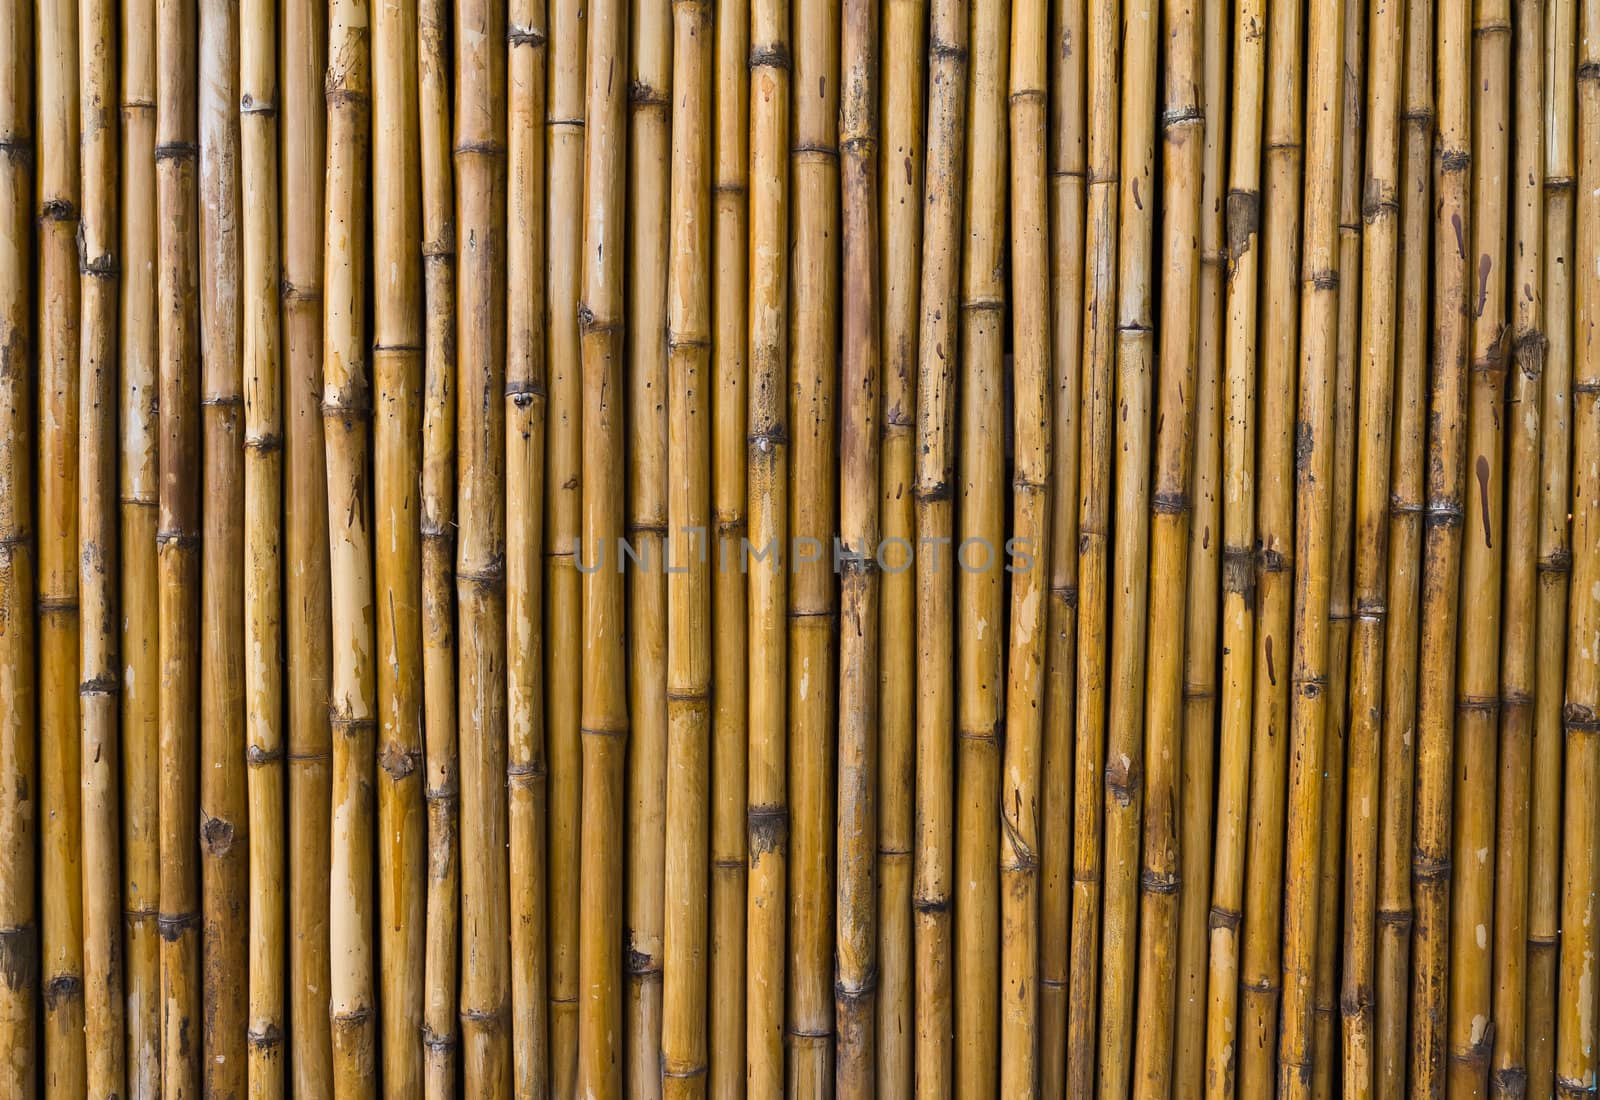 Bamboo walls with unique patterns.